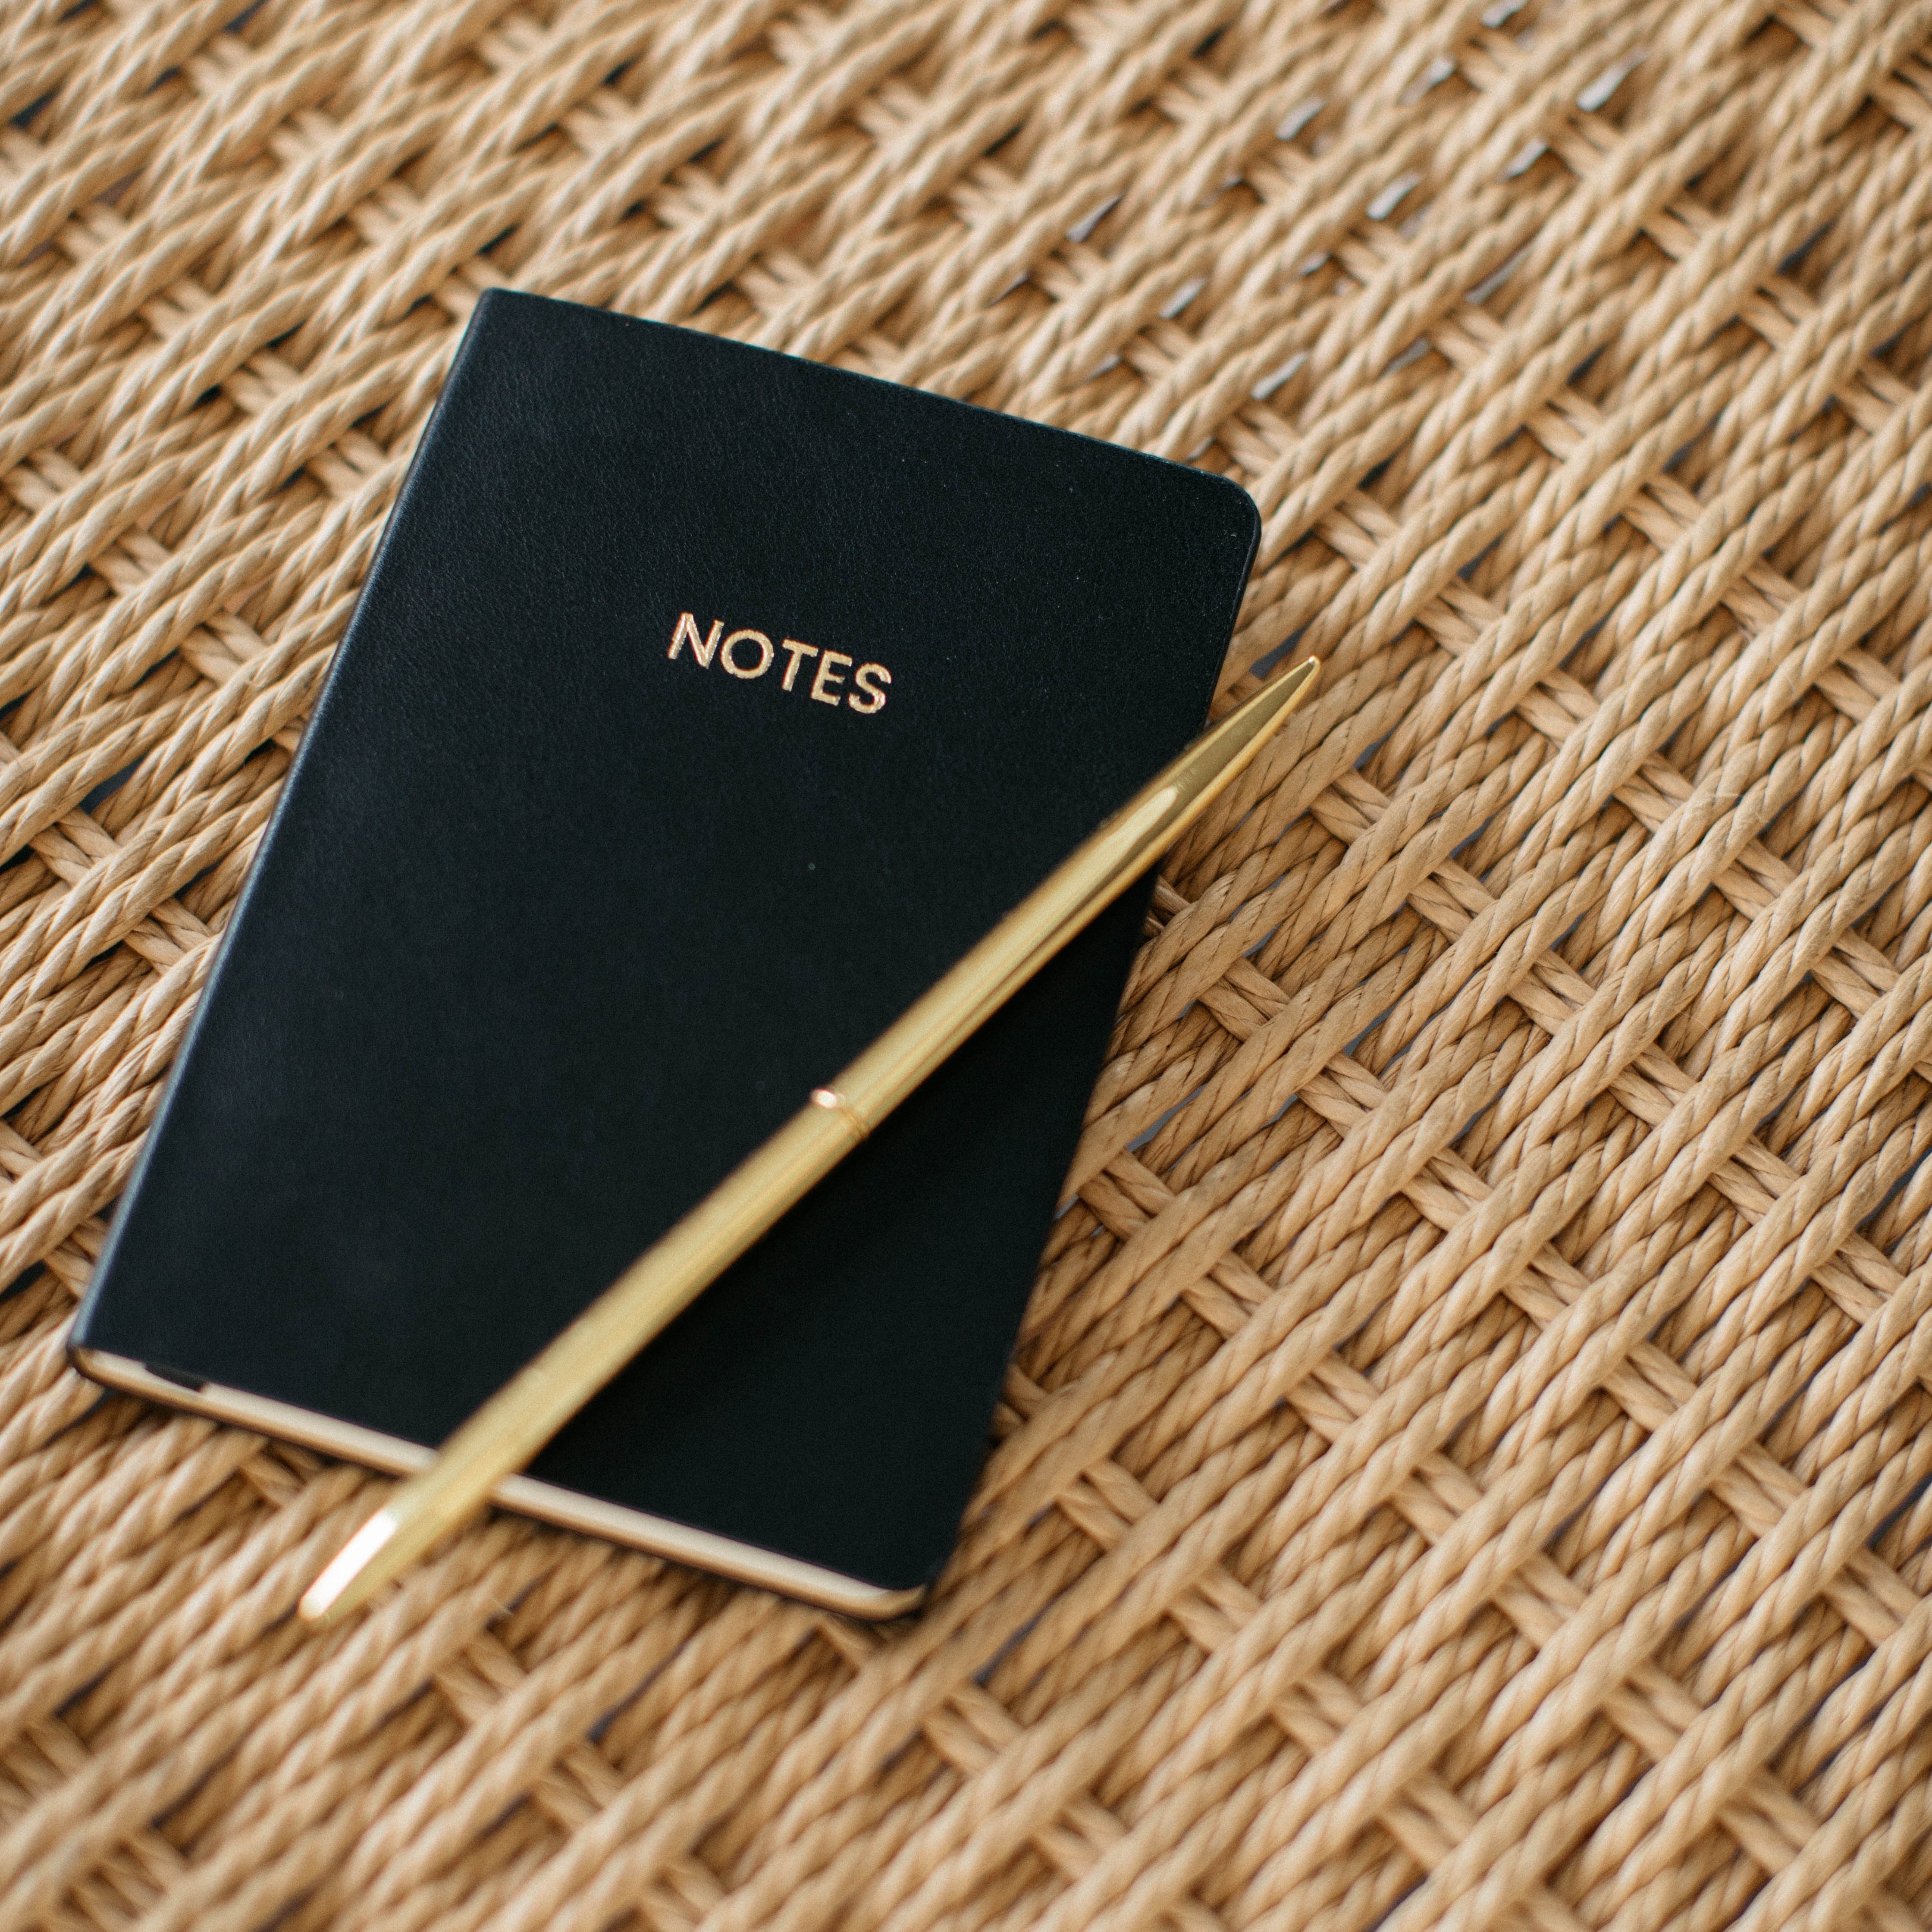 Black A6 Pocket Notebook with gold "NOTES" on the cover